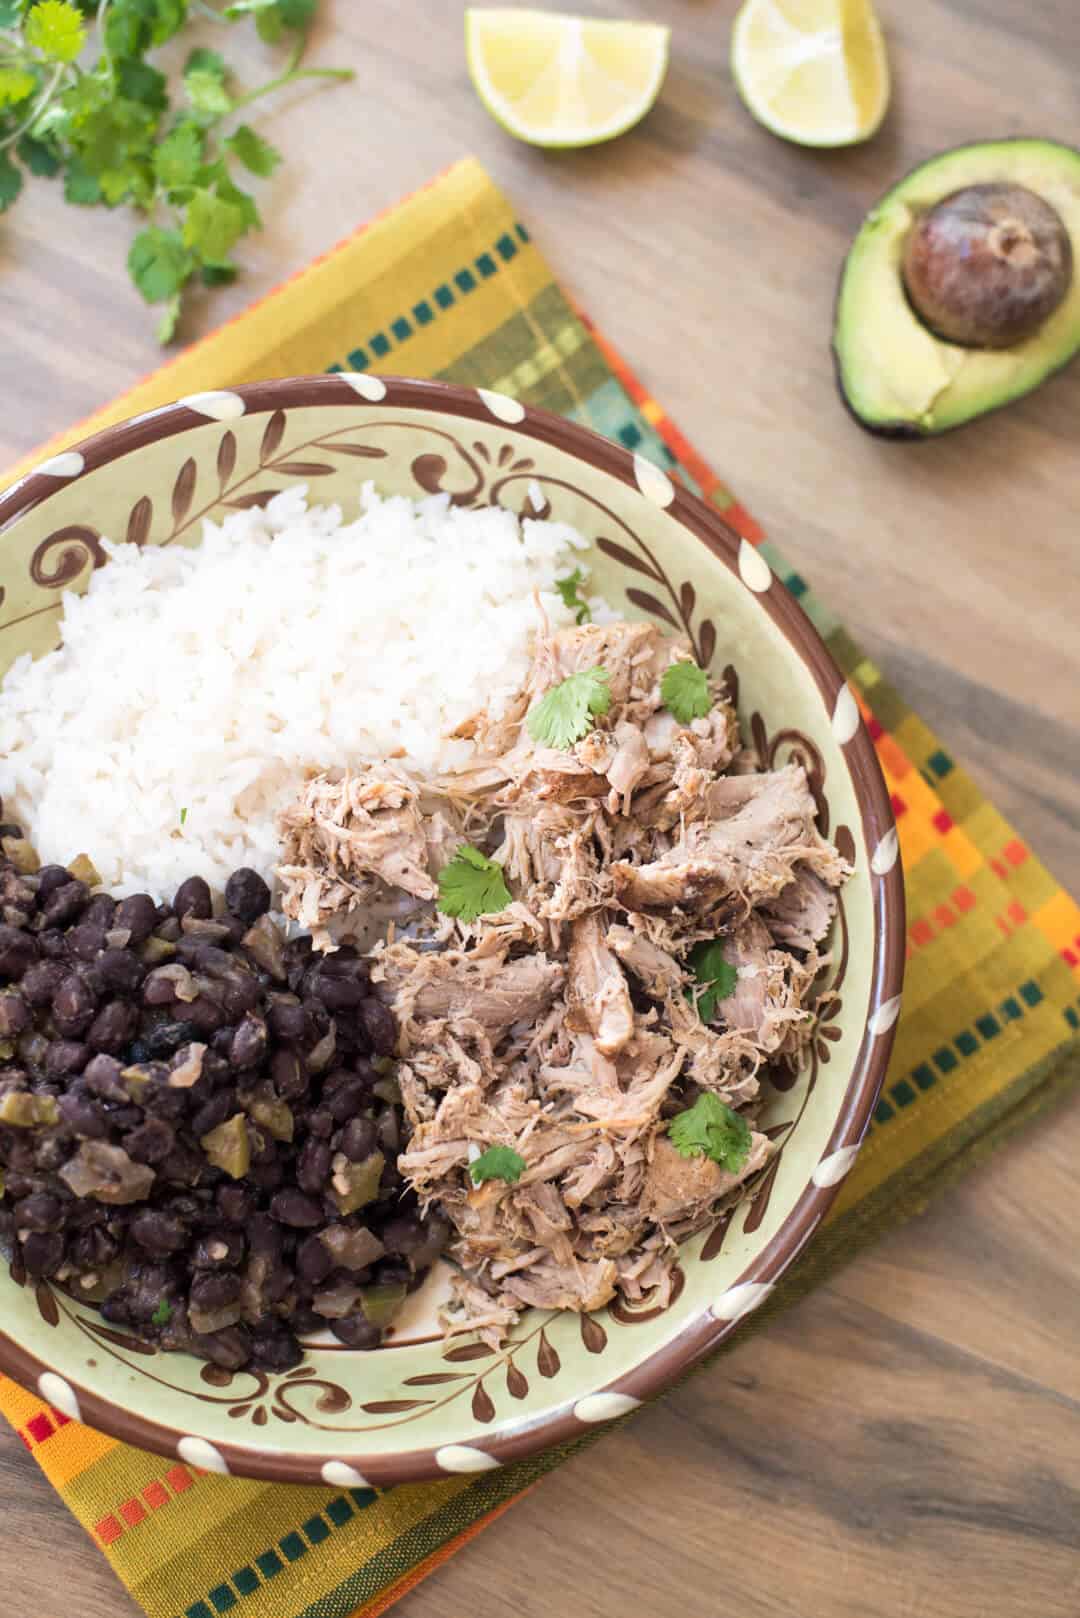 Slow Cooker Cuban Pork with Black Beans and white rice in a patterned bowl on an orange and green patterned cloth.